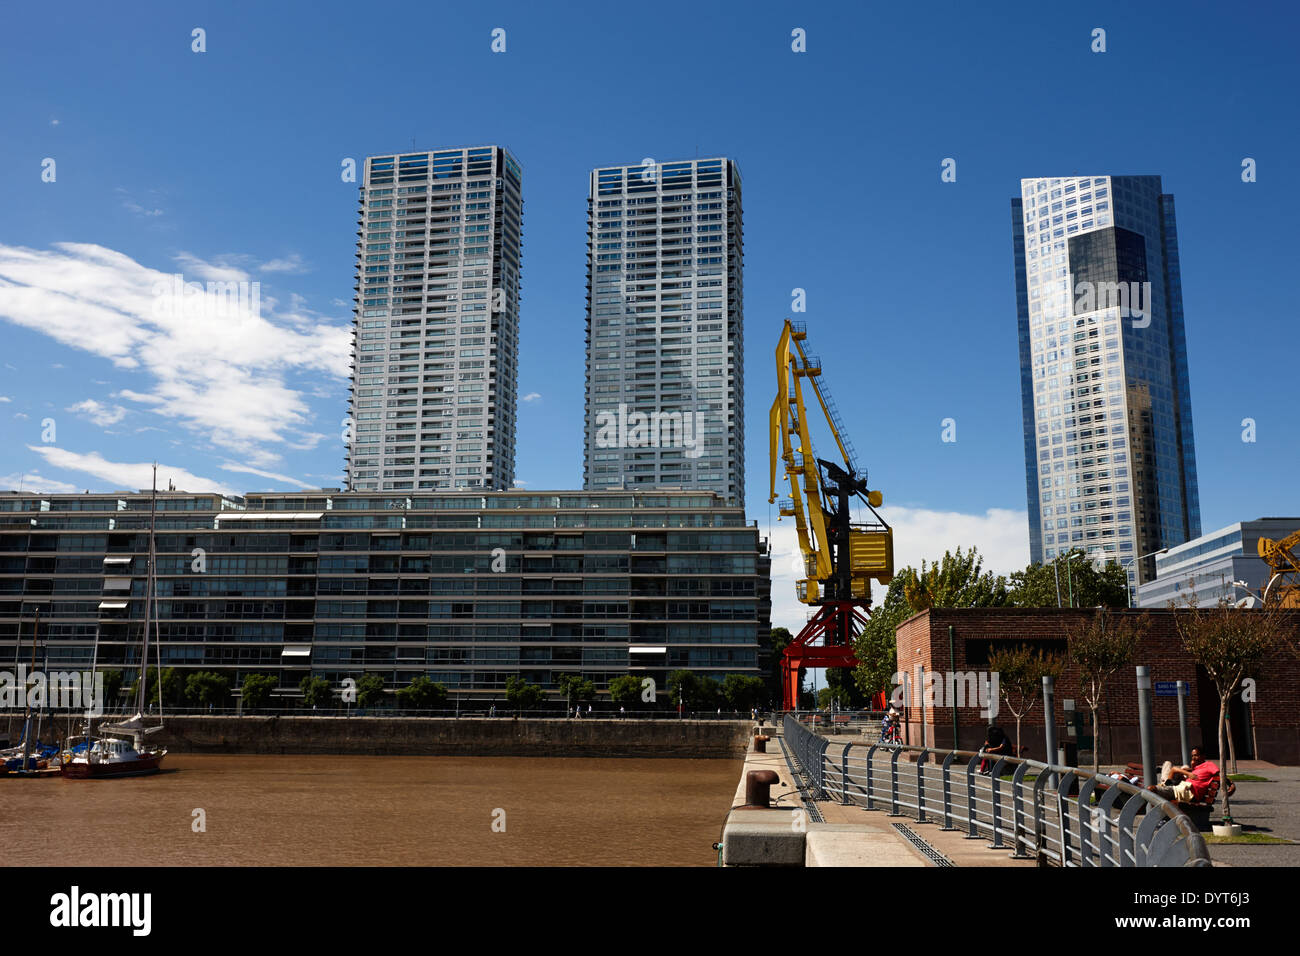 madero centre and old crane Puerto Madero Buenos Aires Argentina Stock Photo